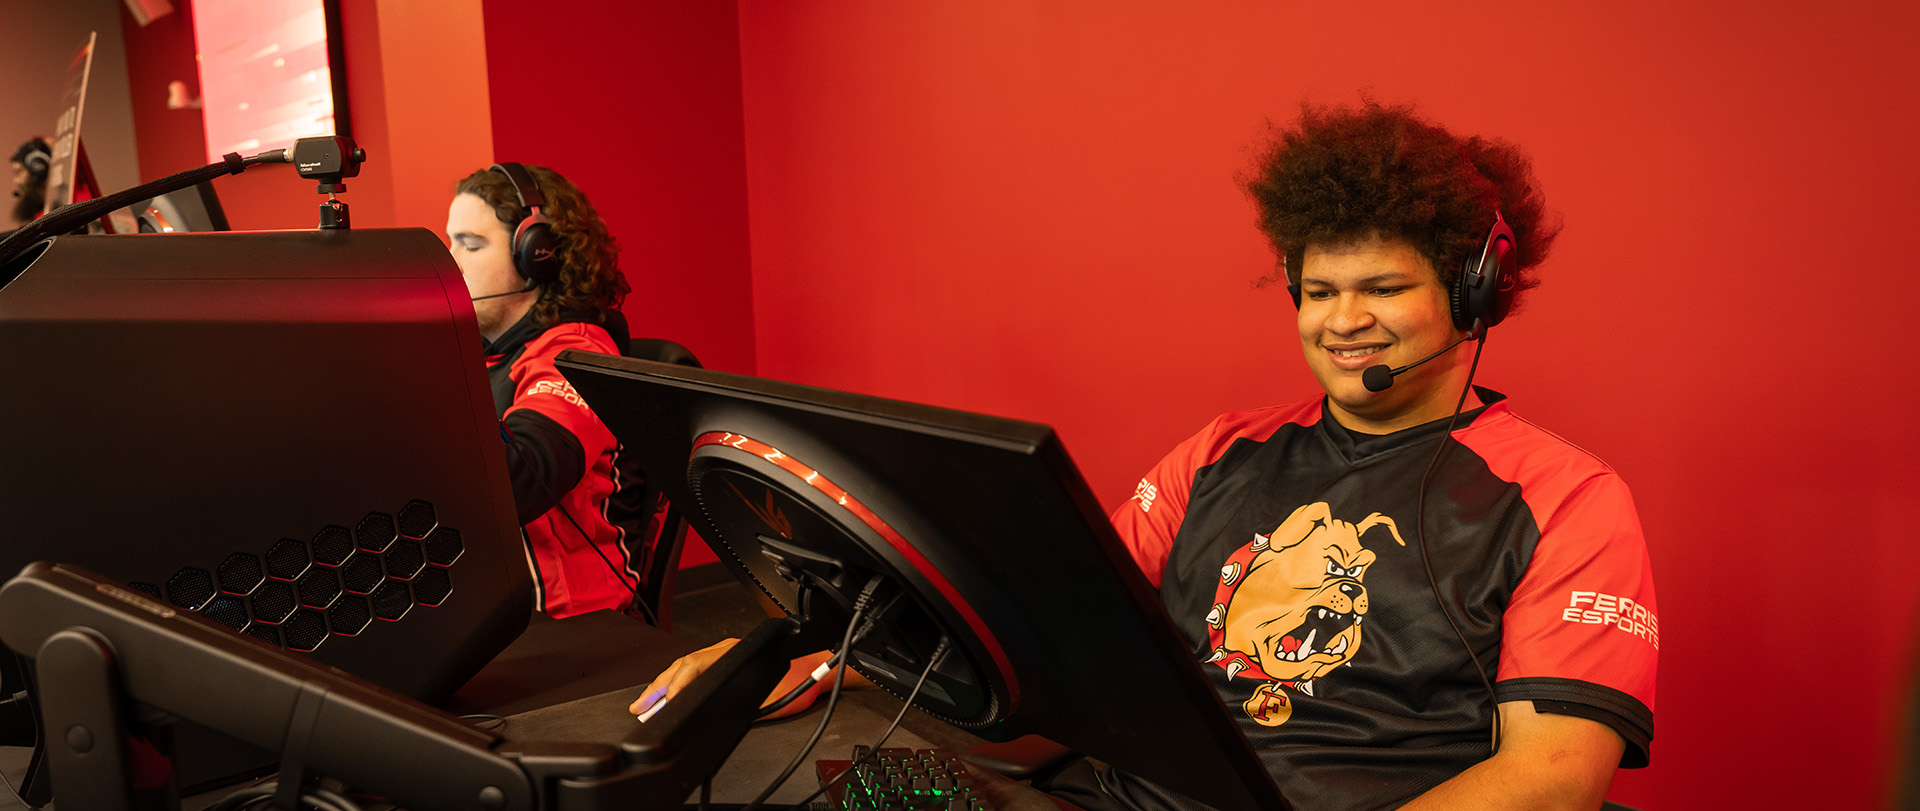 Students competing in esports at Ferris State University